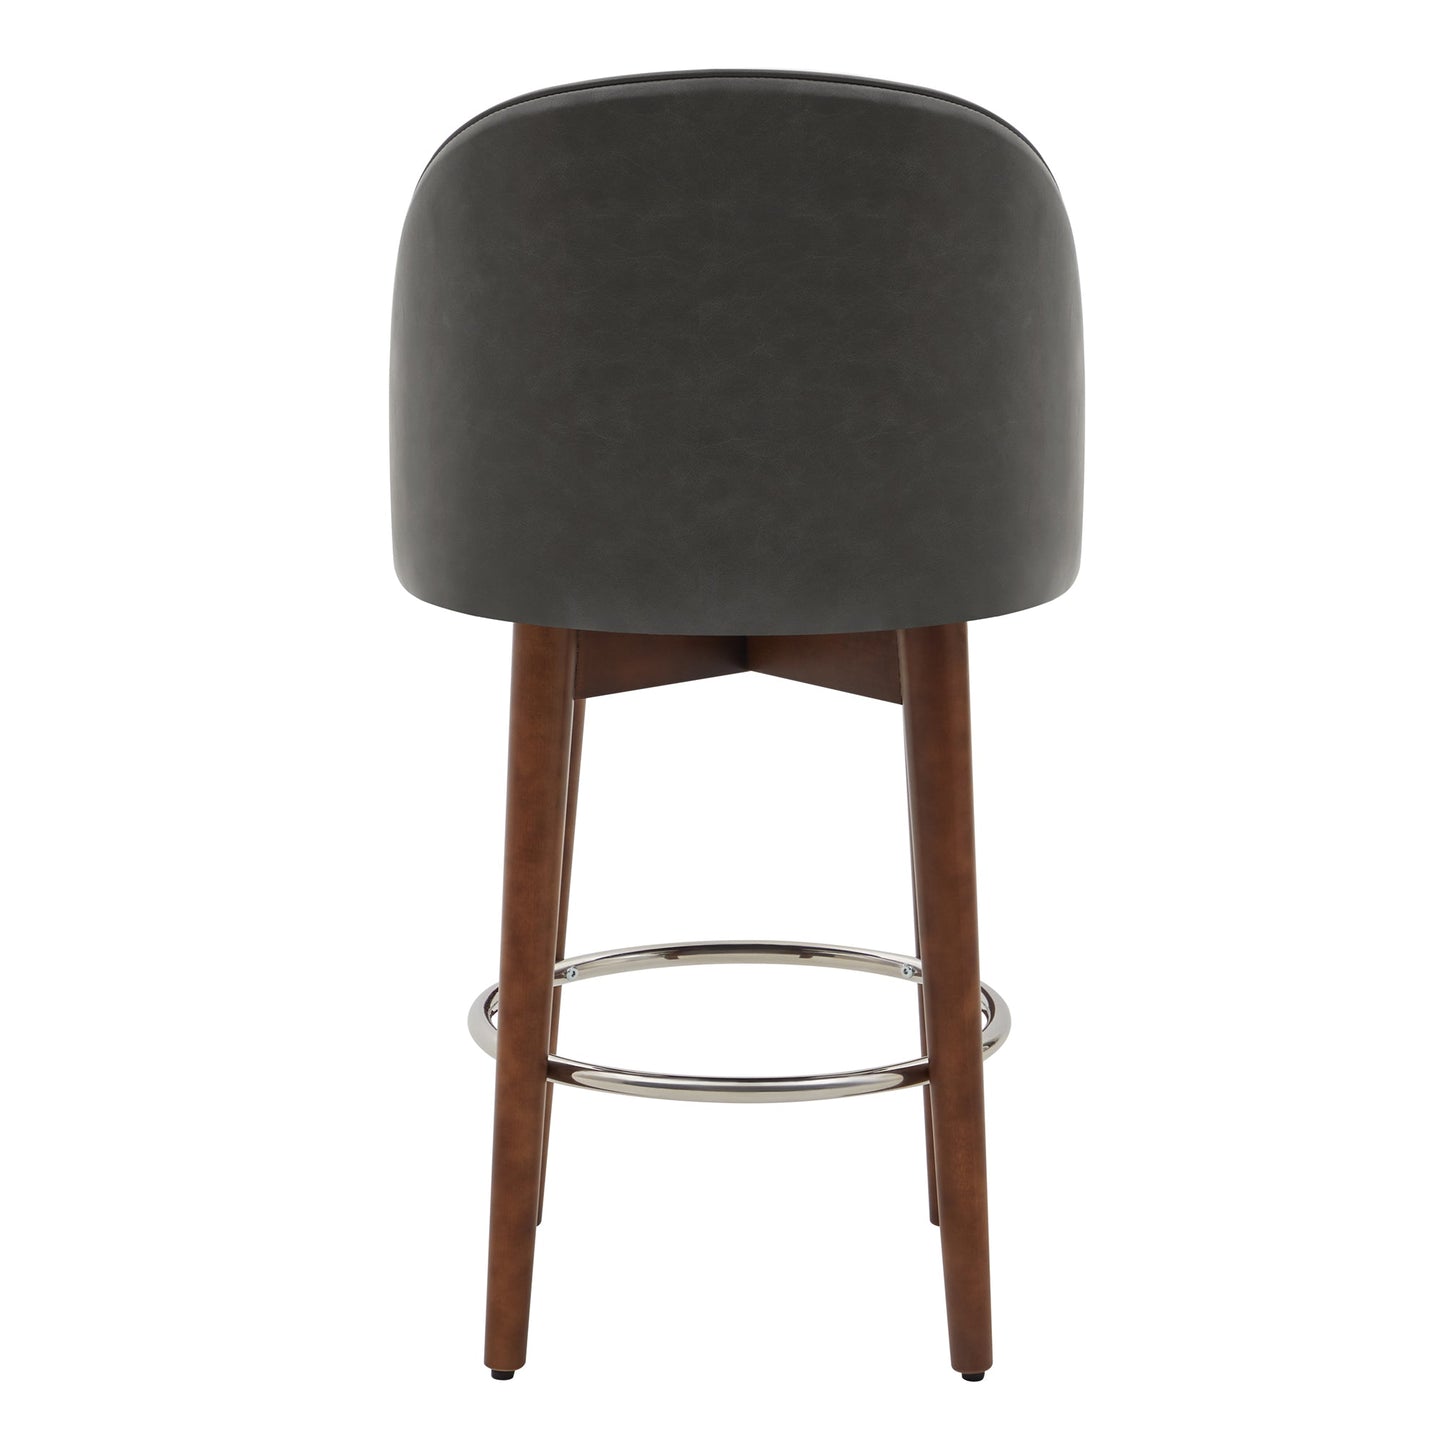 CHITA LIVING-Rosa Swivel Counter Stool (Set of 2)-Counter Stools-Faux Leather-Retro Grey-